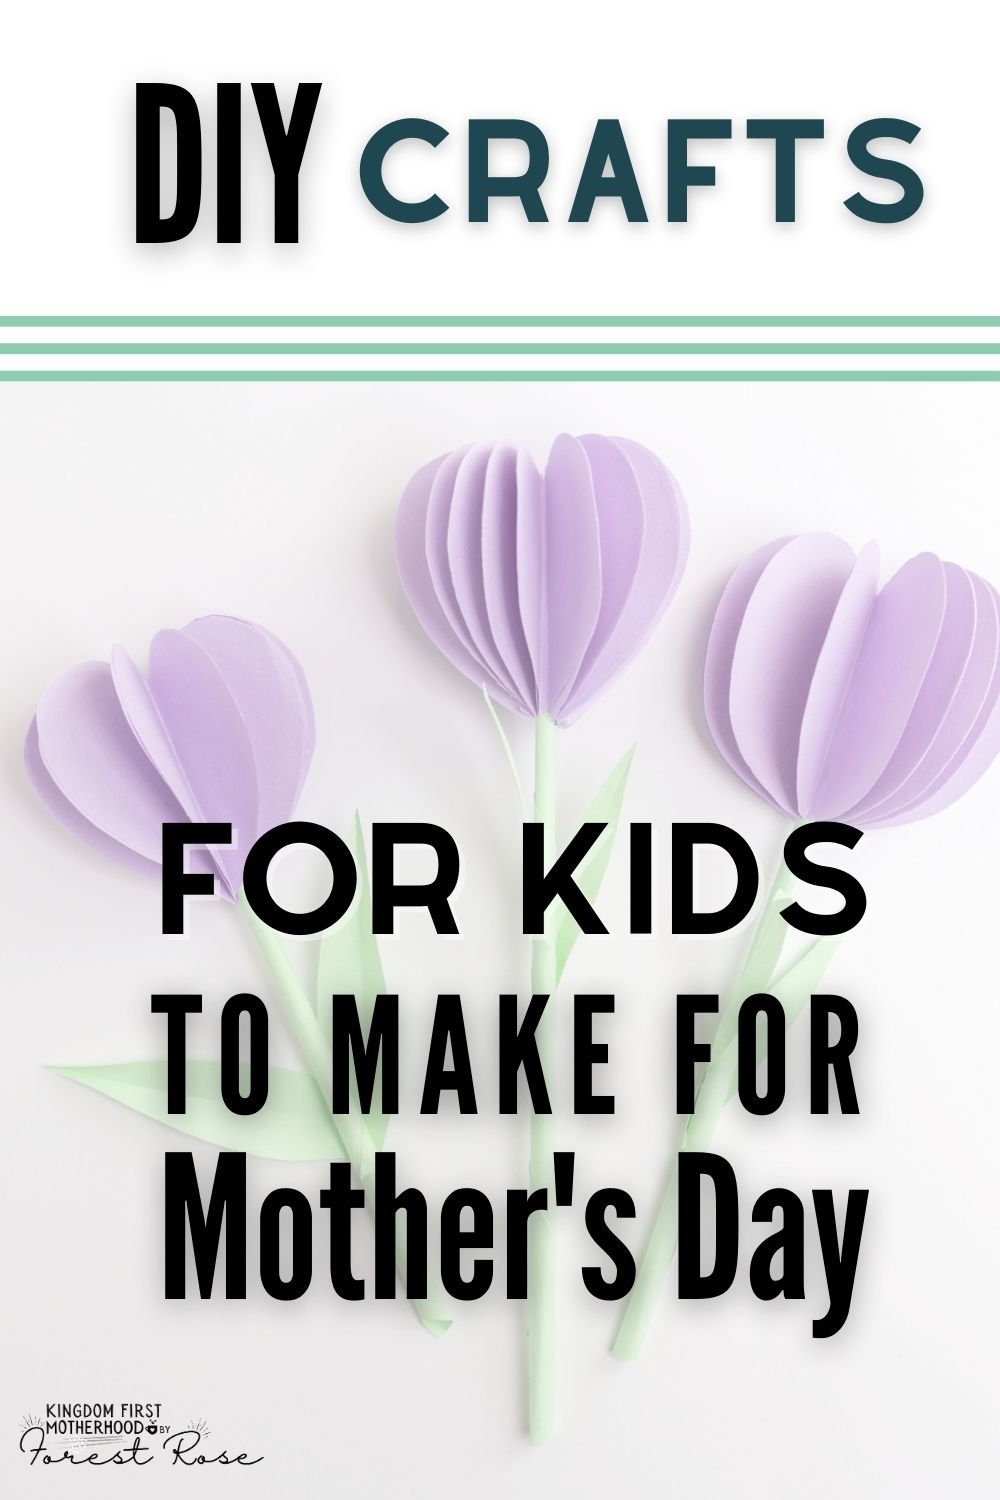 Are you looking for crafts for your kids to make for mother's Day? I love getting handmade gifts from my kids. Here are the sweetest, simplest DIY Mother's Day Gift ideas for Kids to Make.